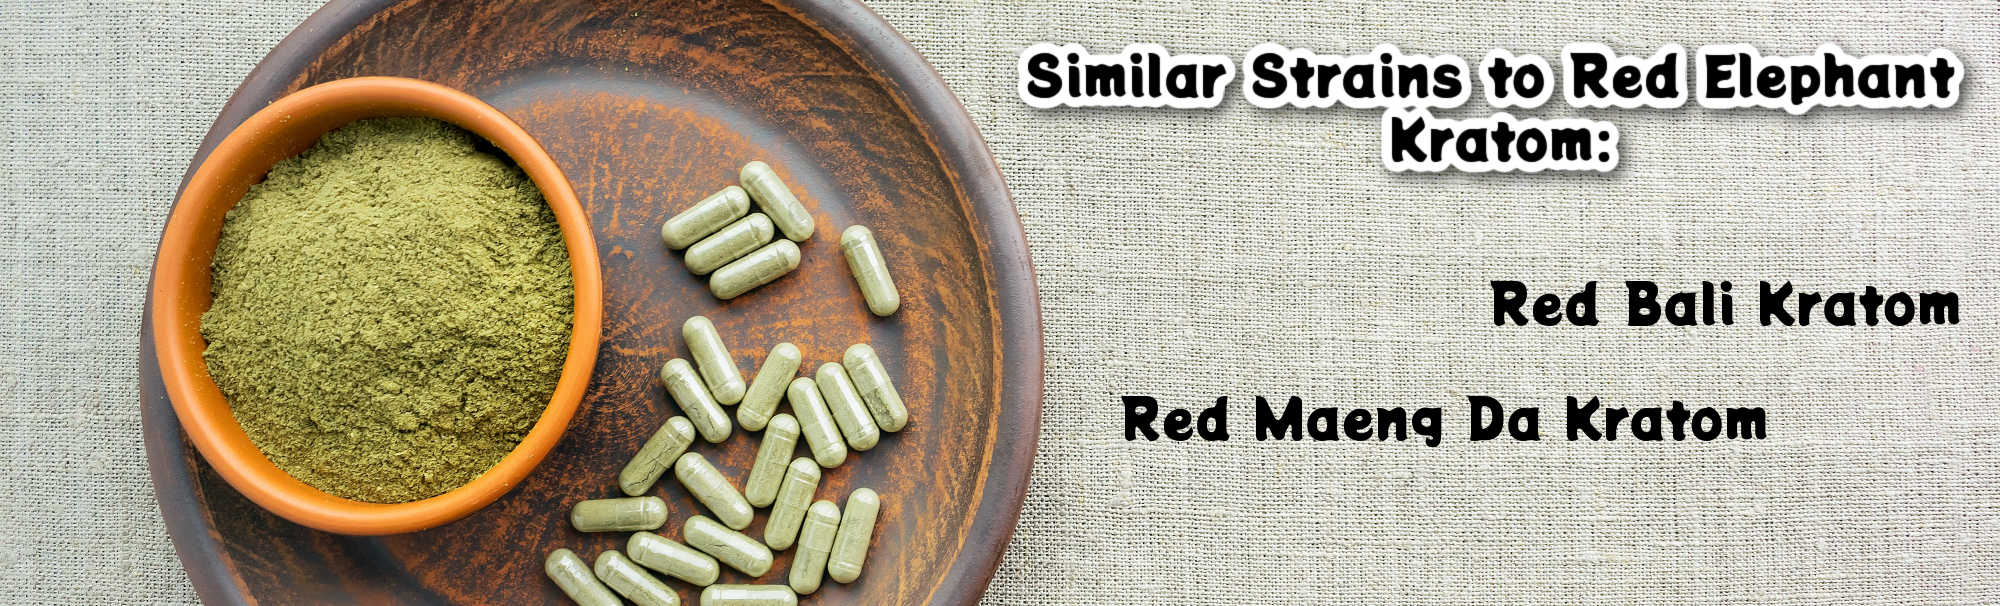 image of are there similar strains to red elephant kratom